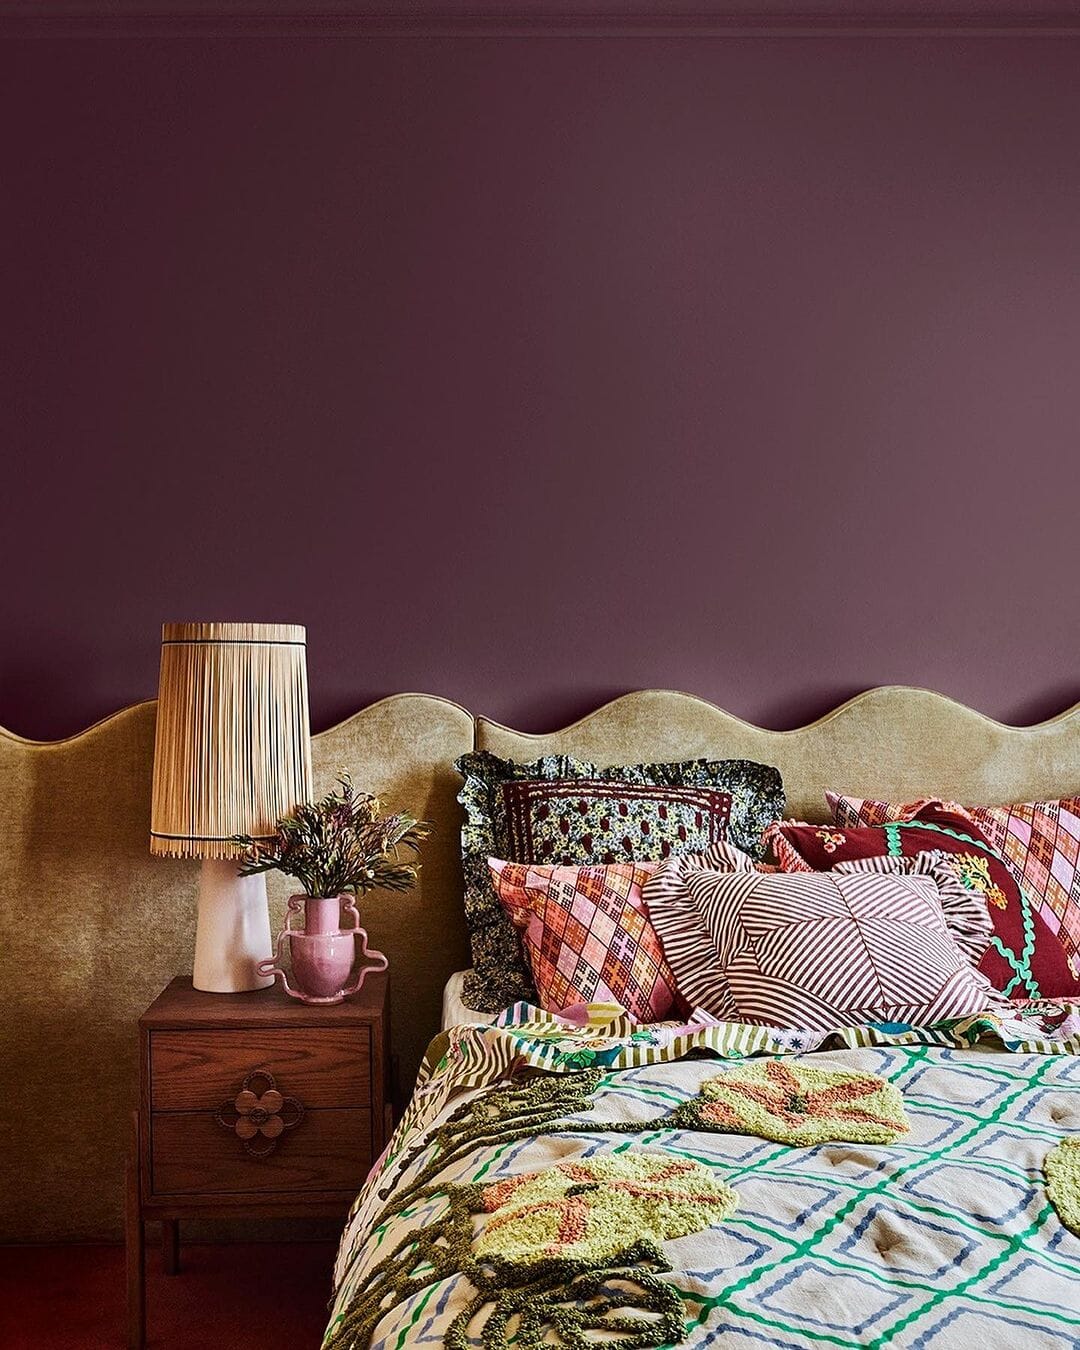 bedrooom featuring purple walls styled with trendy decor elements